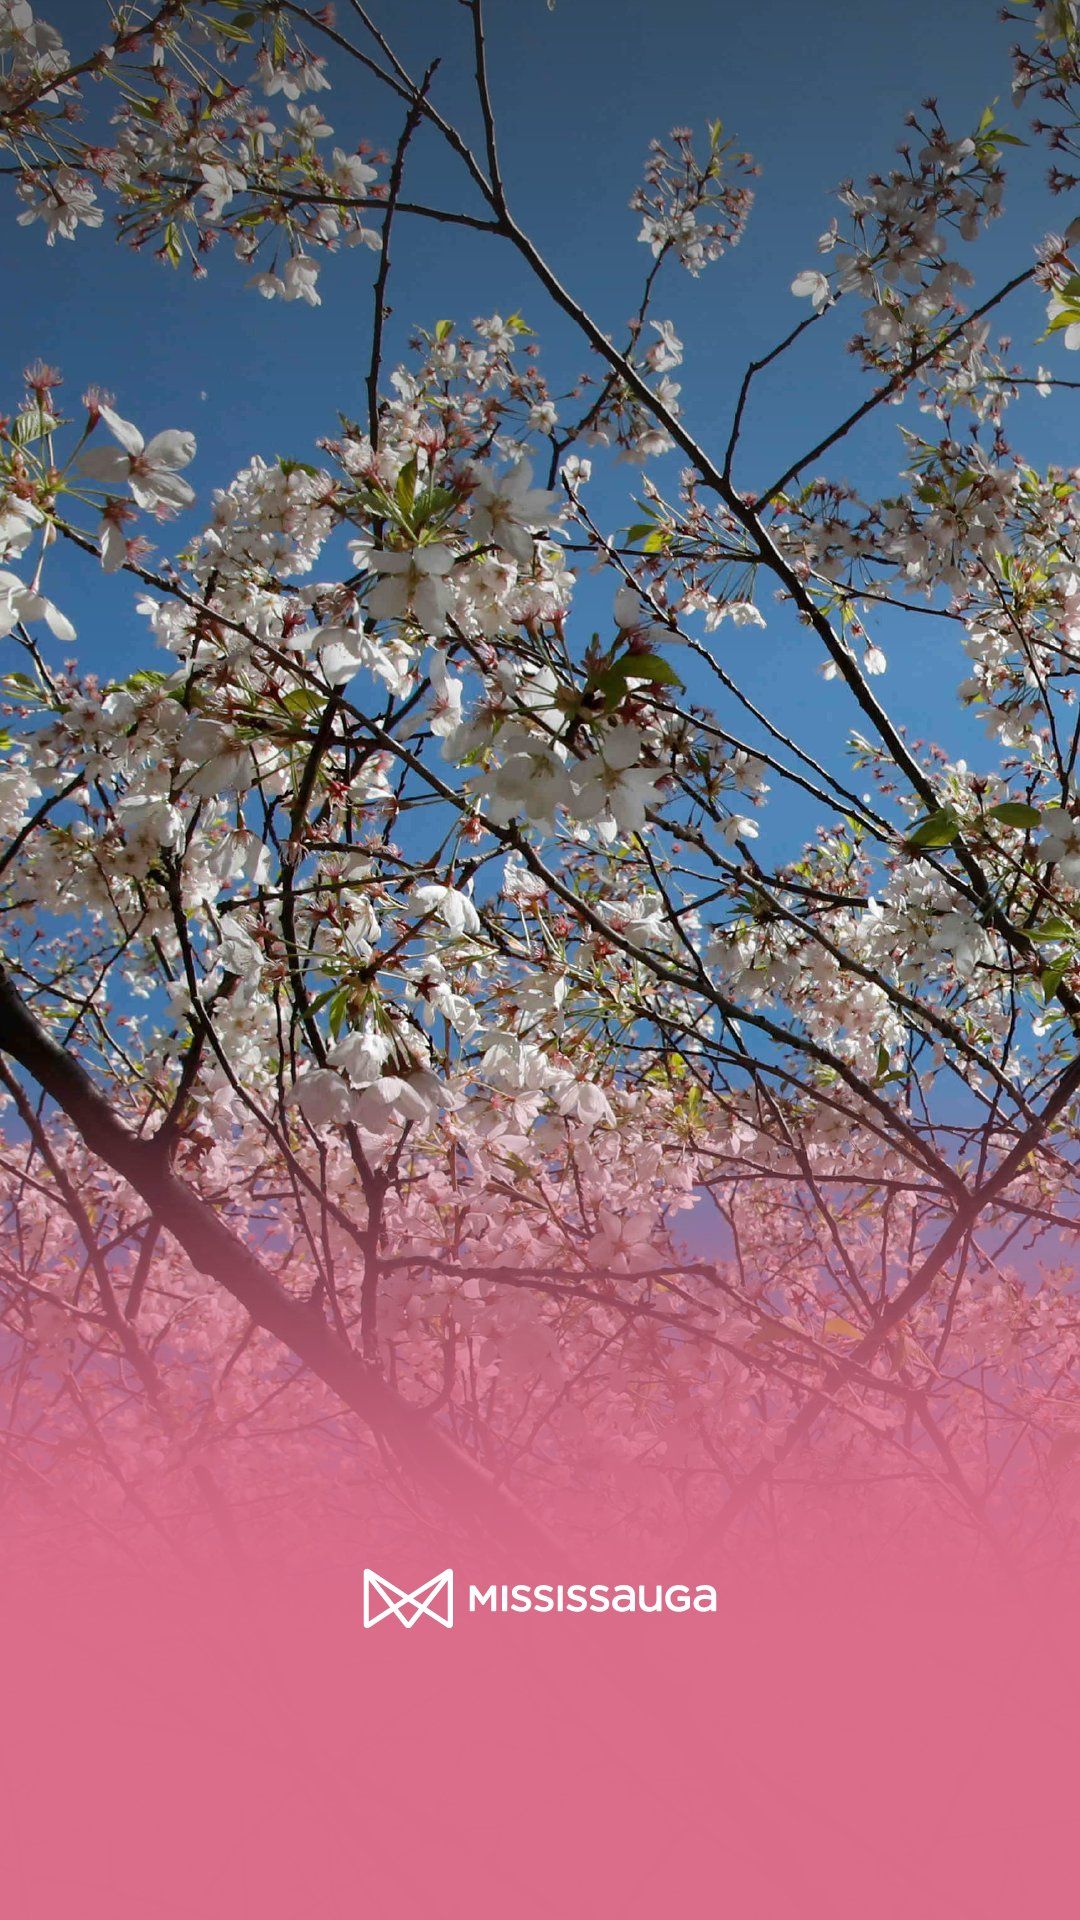 A Mississauga logo is displayed on a photo of cherry blossoms - Cherry blossom